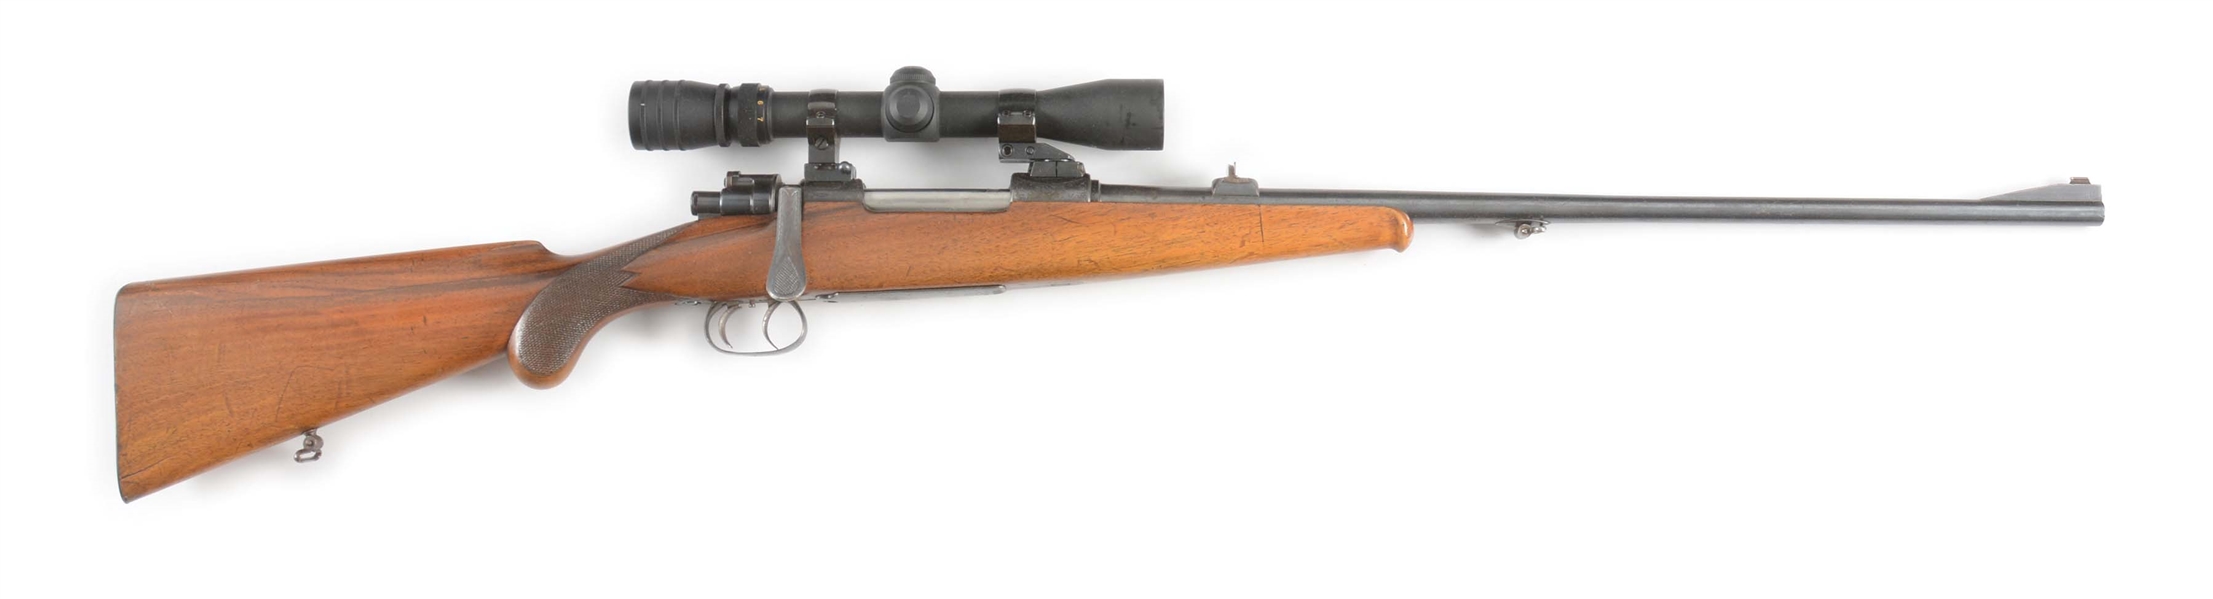 (C) FERLACH MAUSER BOLT ACTION RIFLE WITH SCOPE.